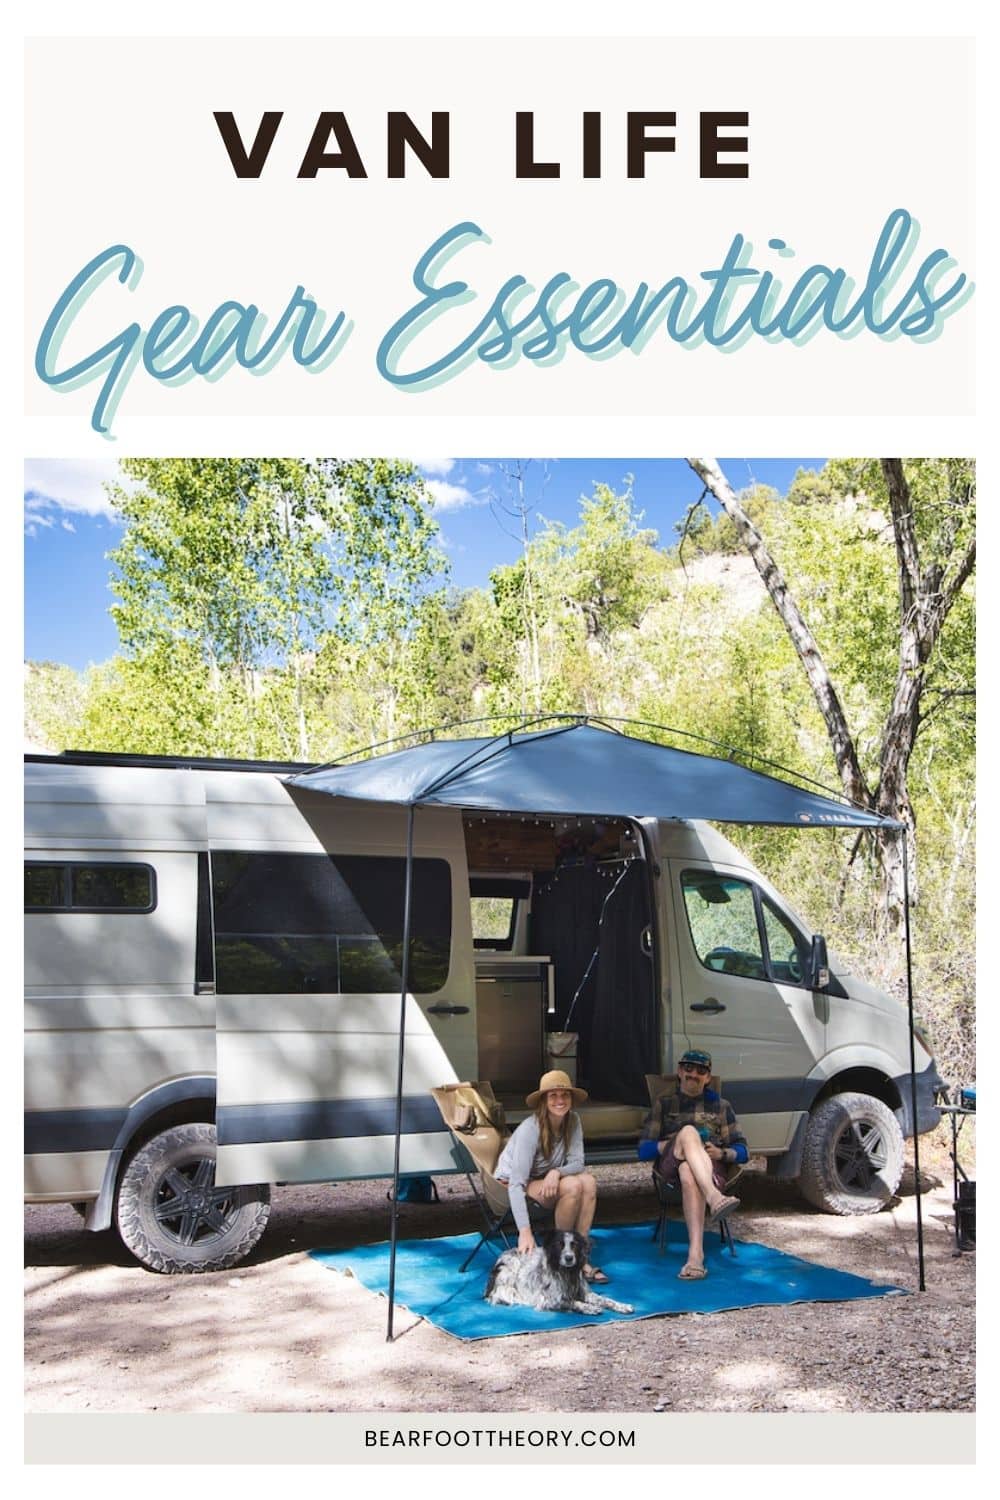 36 Van Life Essentials for Life On The Road – Bearfoot Theory